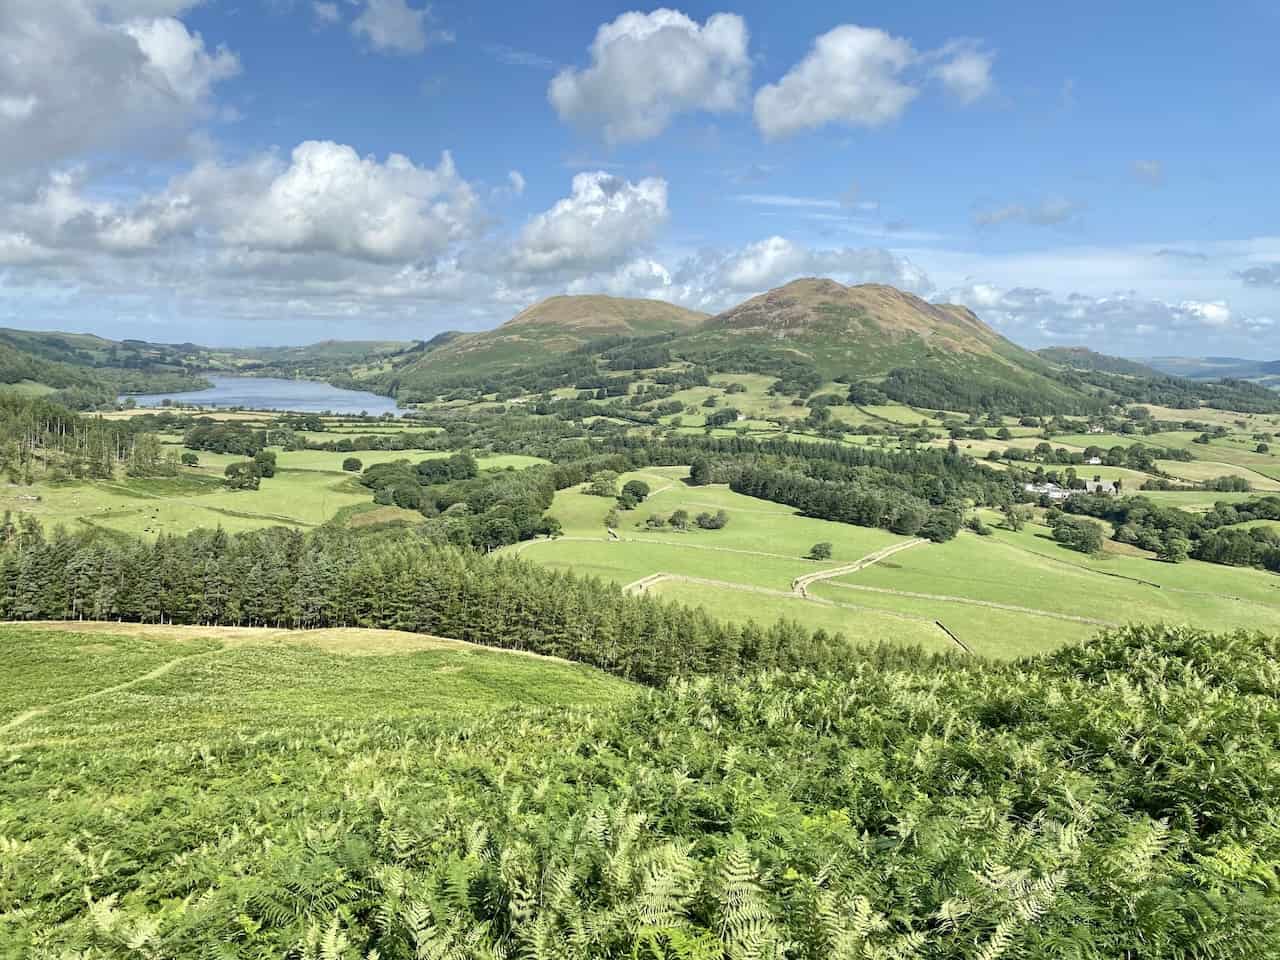 The view of Loweswater, Darling Fell and Low Fell from the northern flanks of Mellbreak.